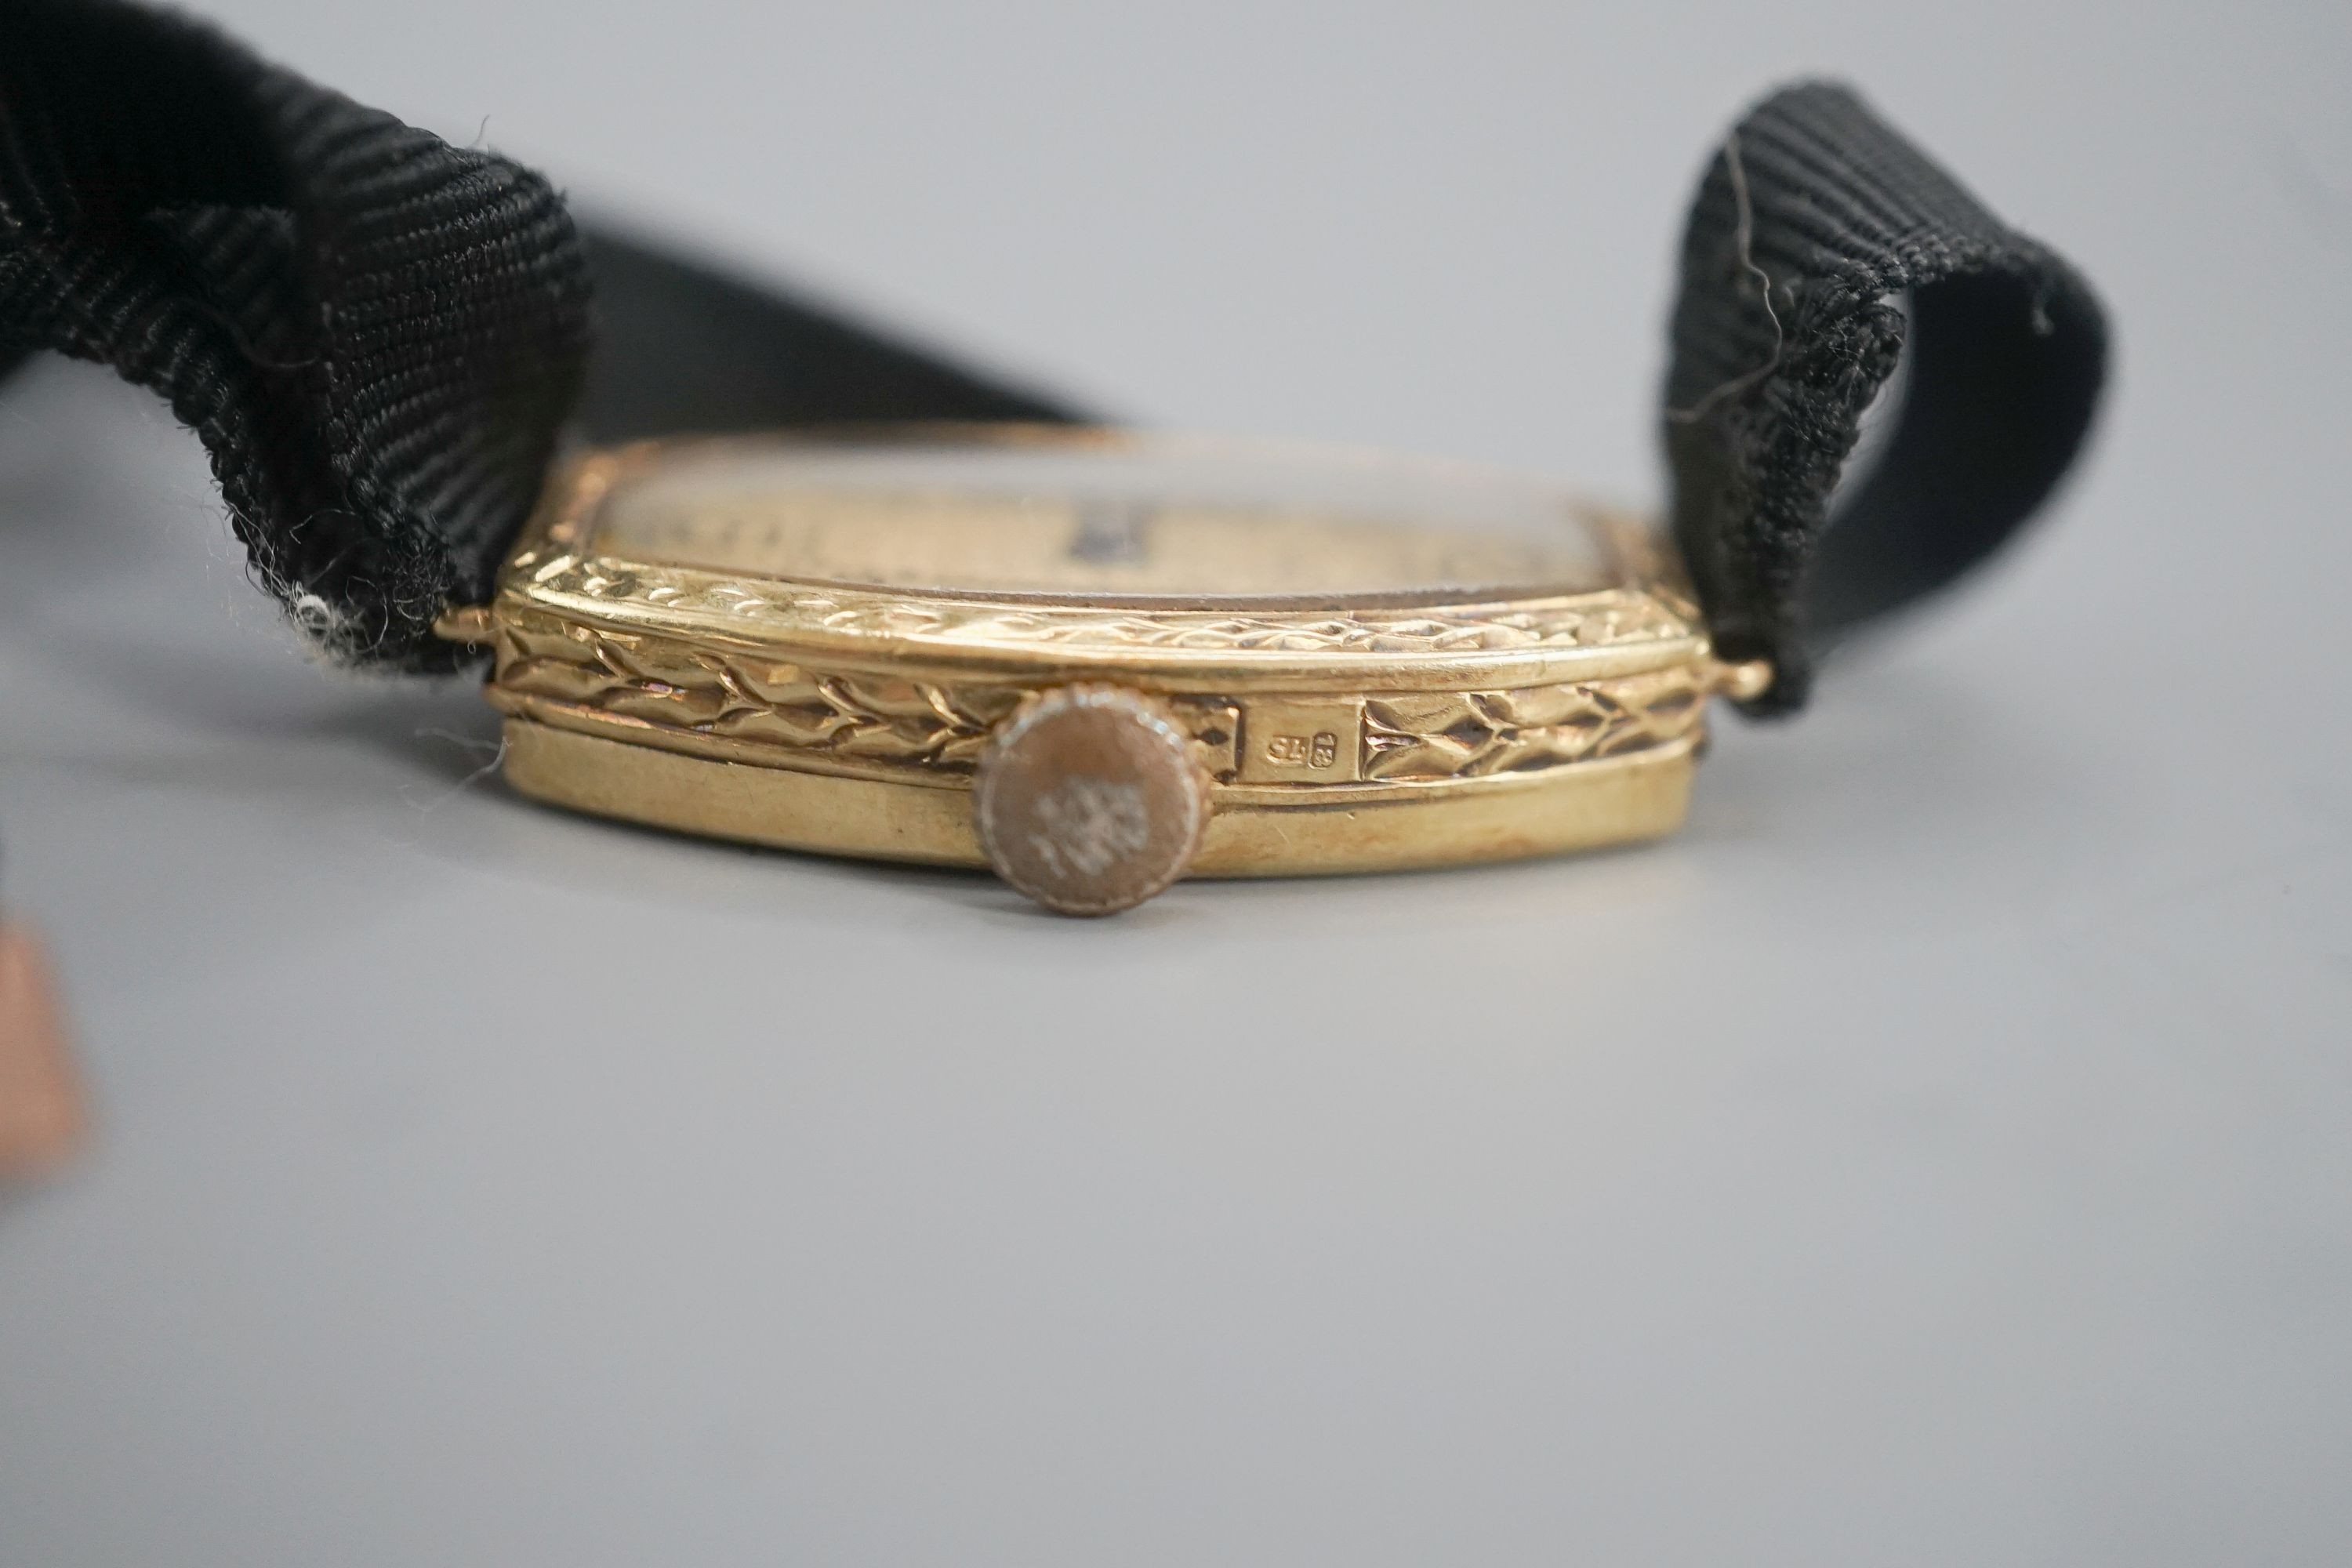 A lady's early 20th century 18ct gold manual wind wrist watch, case diameter 17mm, on a sash strap with 9ct buckle